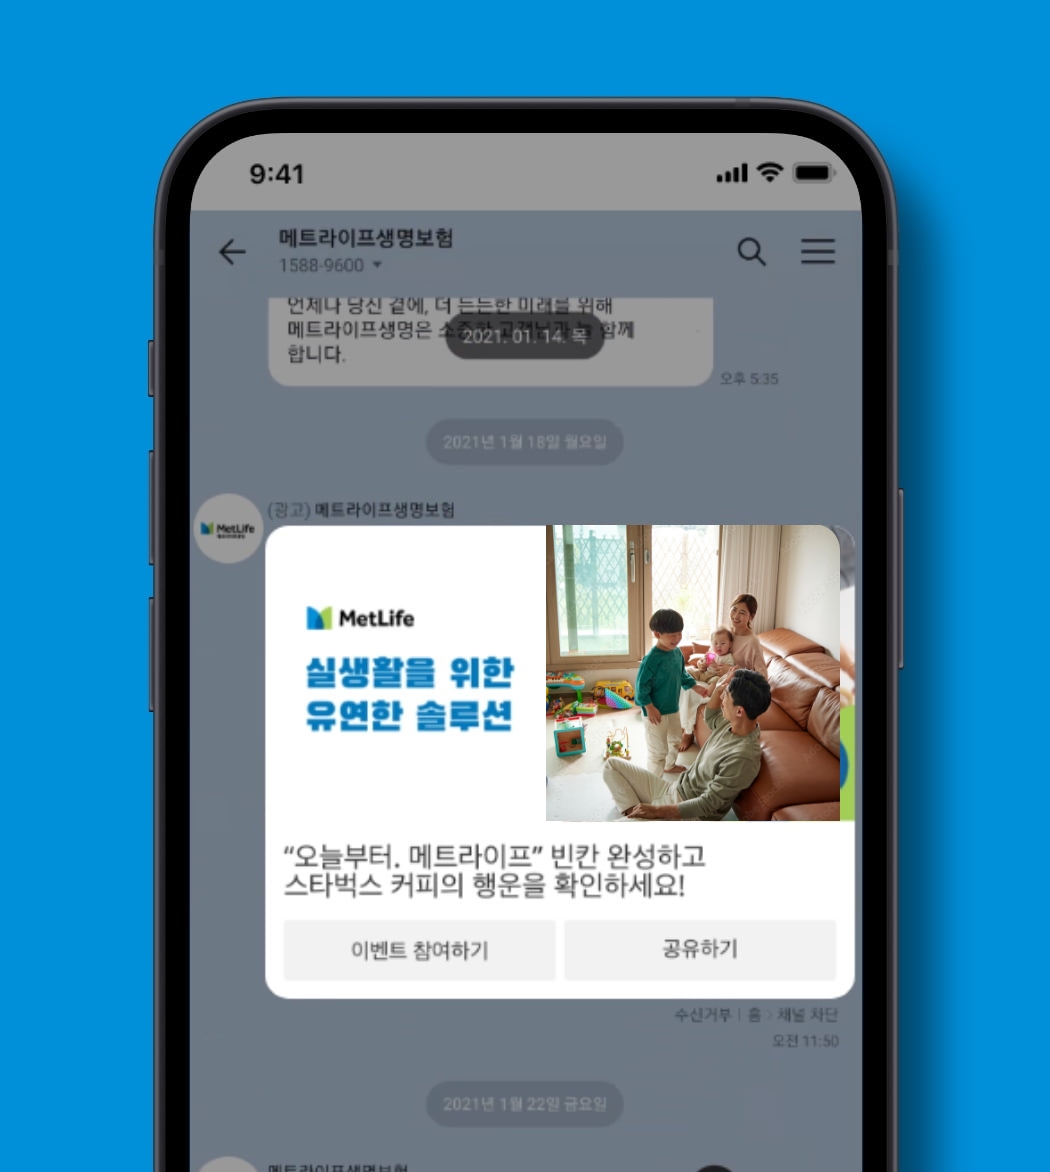 Phone screen showing branded communication with photography on Kakao.